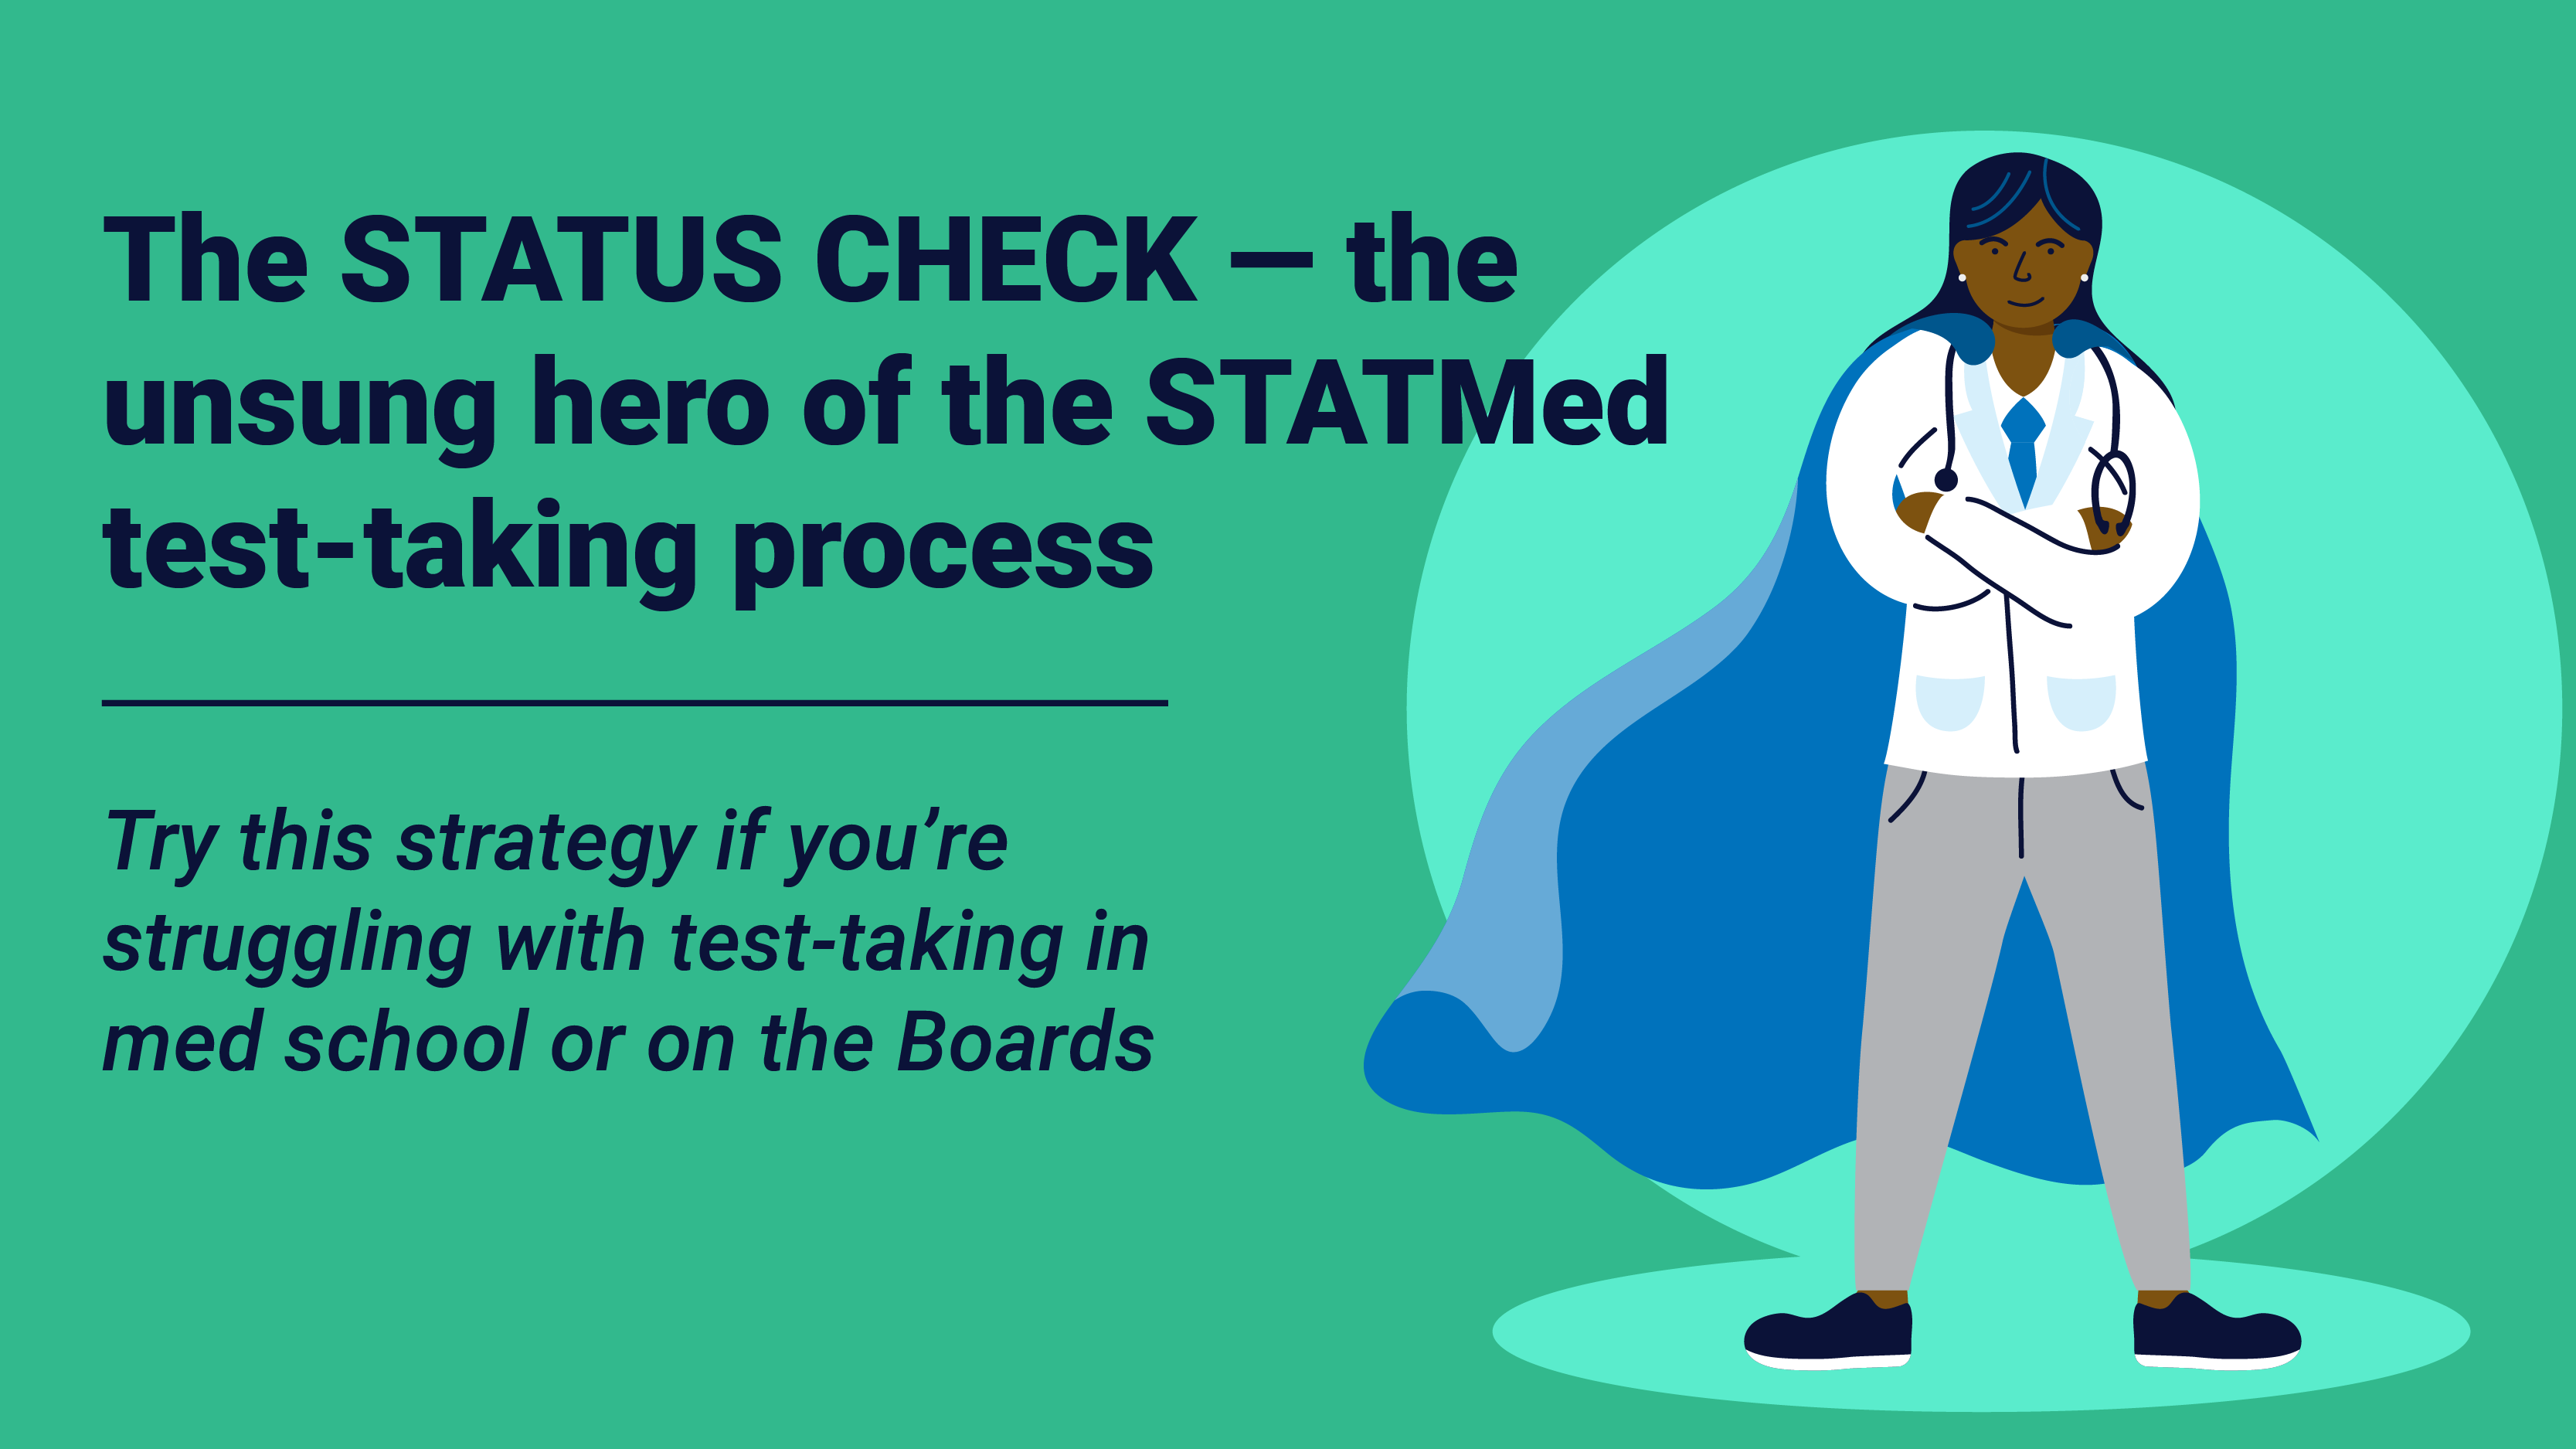 Featured image for “The STATUS CHECK — the unsung hero of the STATMed Test-taking process”